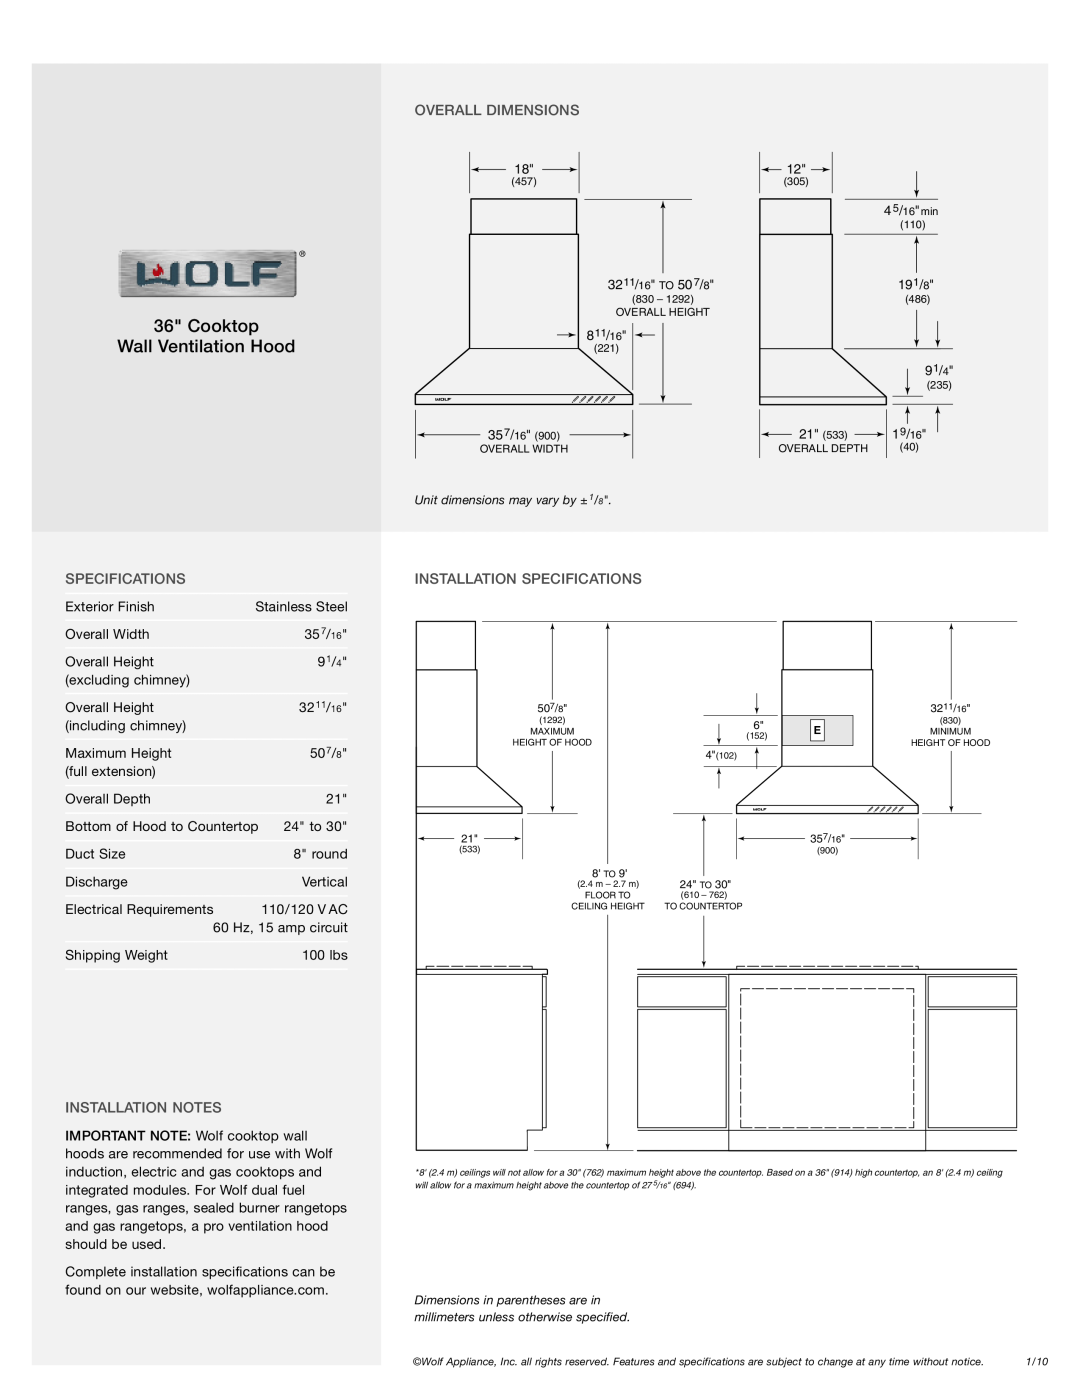 Wolf Appliance Company CTWH36 dimensions Overall Dimensions, Installation Specifications, Installation Notes 